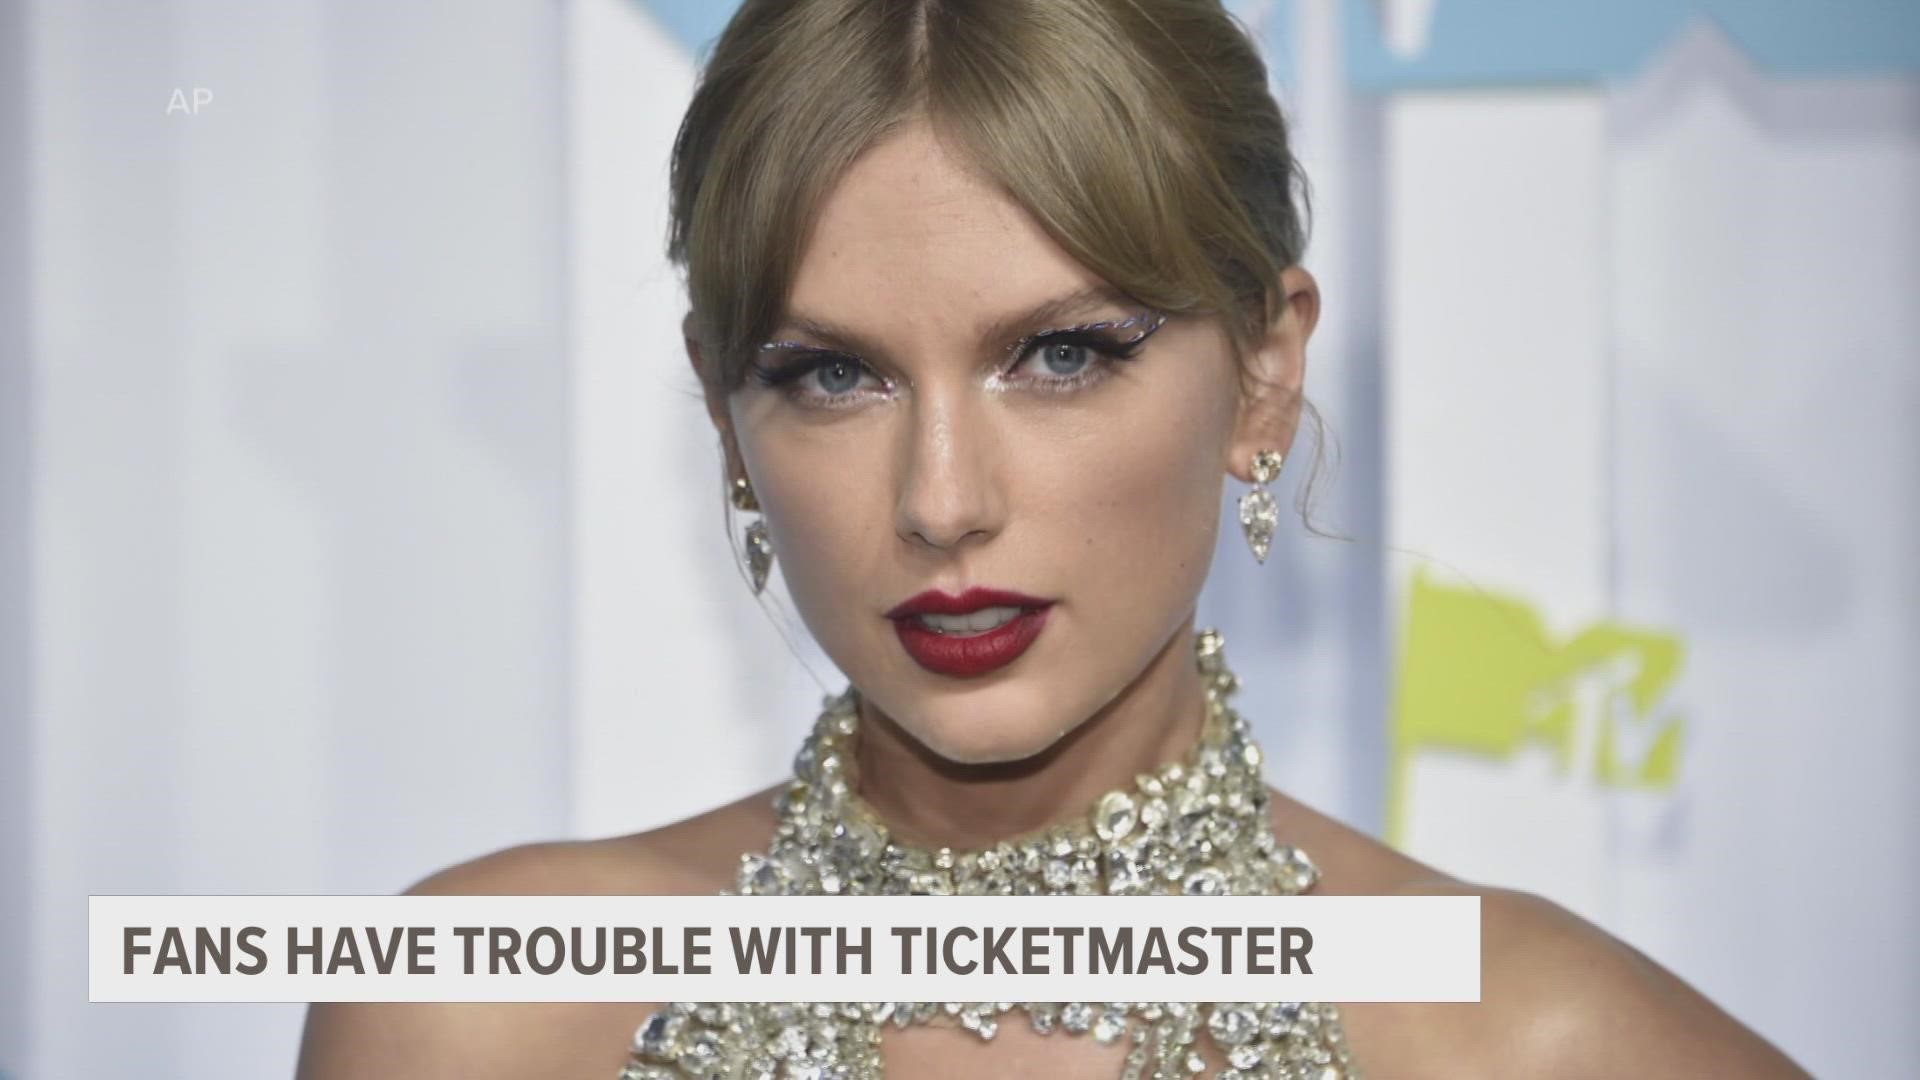 Swifties say they've dealt with website crashes, long wait times and error messages.